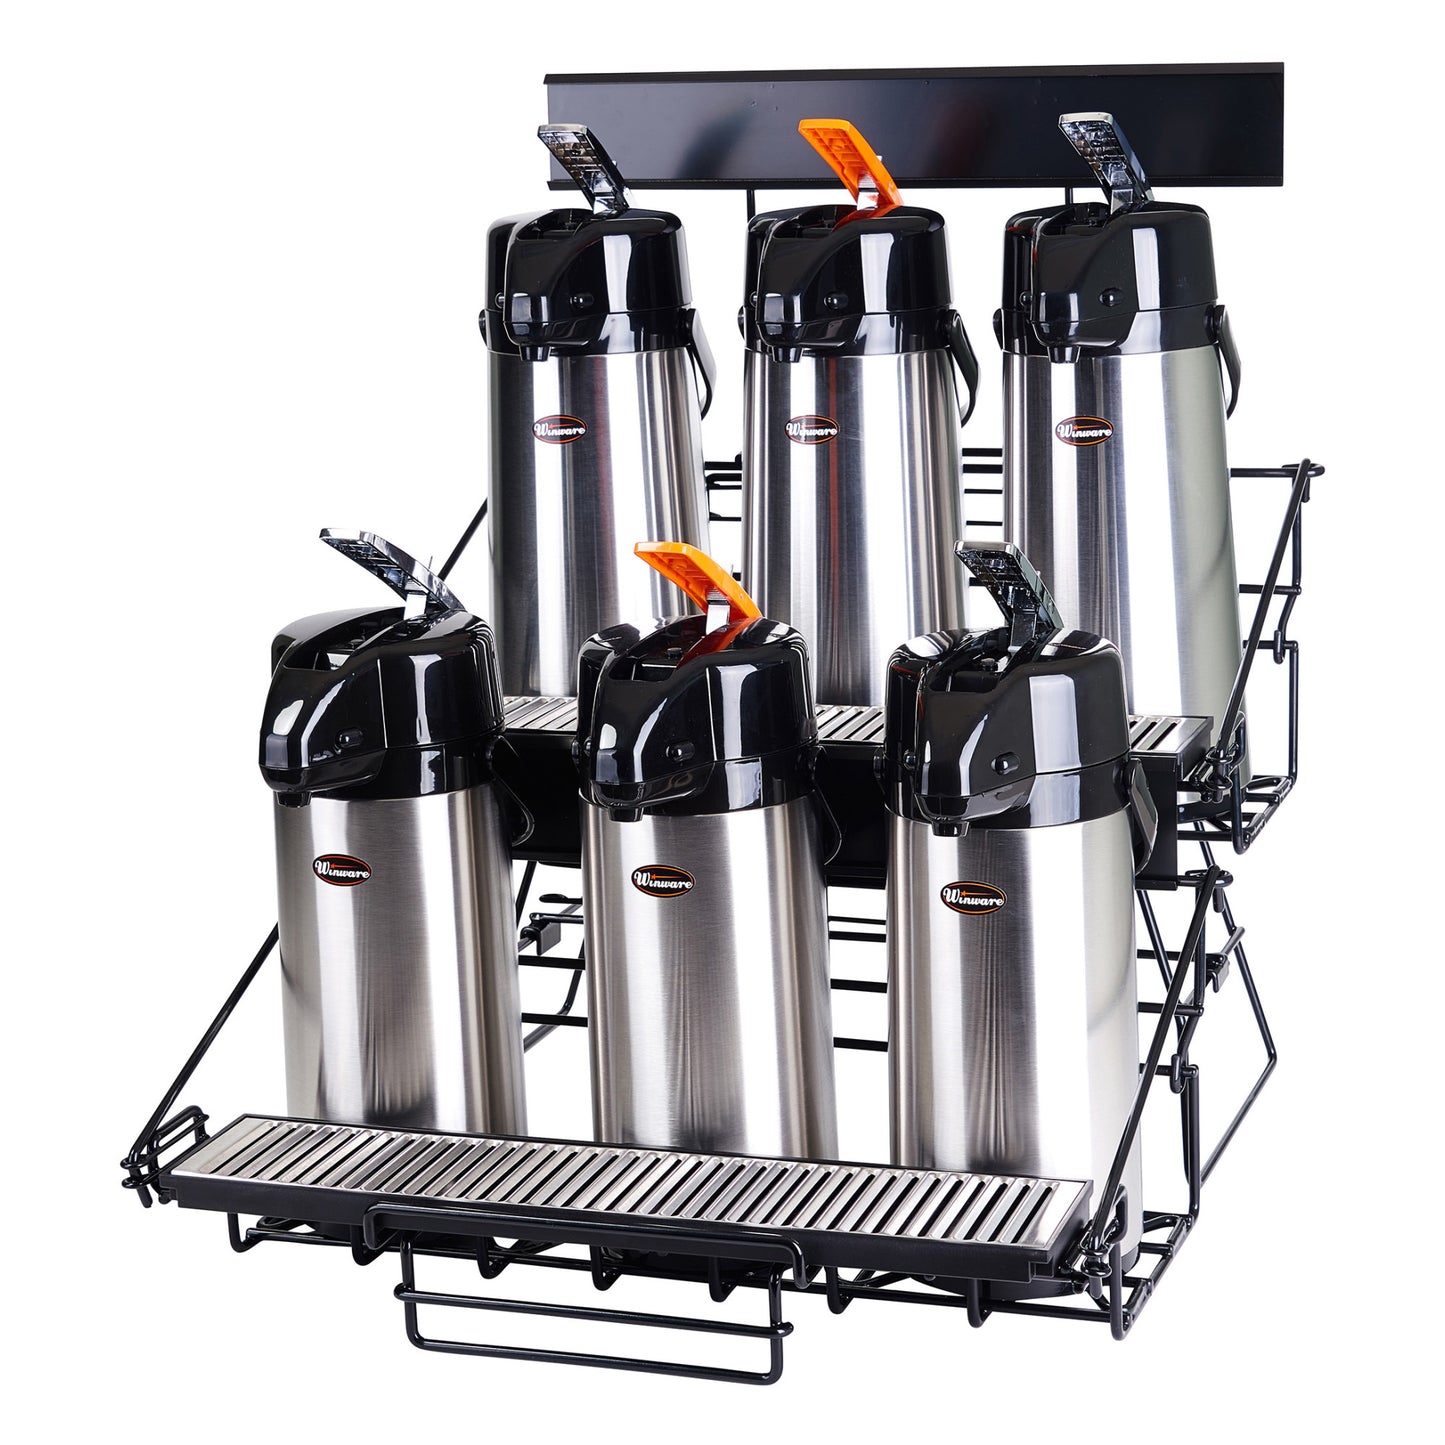 APRK-6 - Two-Level Rack Holds 6 Airpots